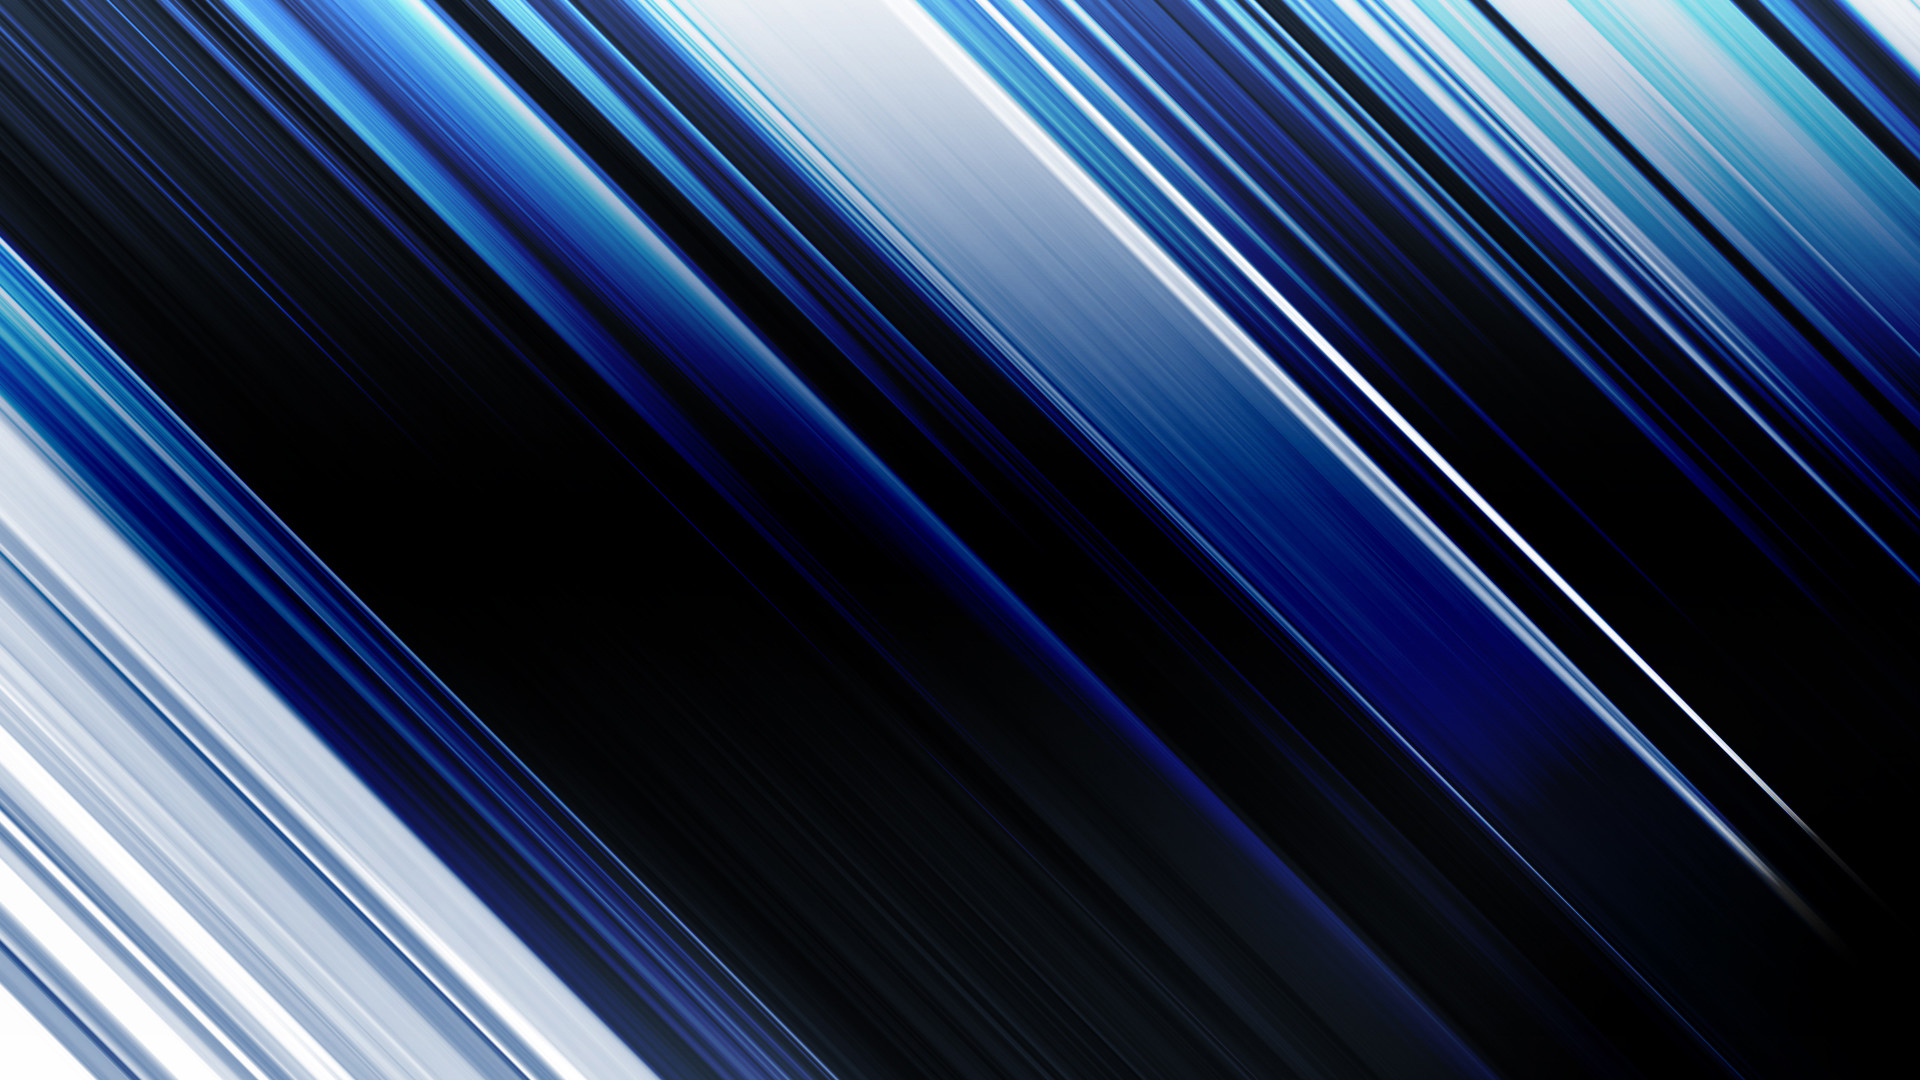 1920x1080 Abstract-Blue-Motion-Blur-Line-wallpaper-wpc9202192